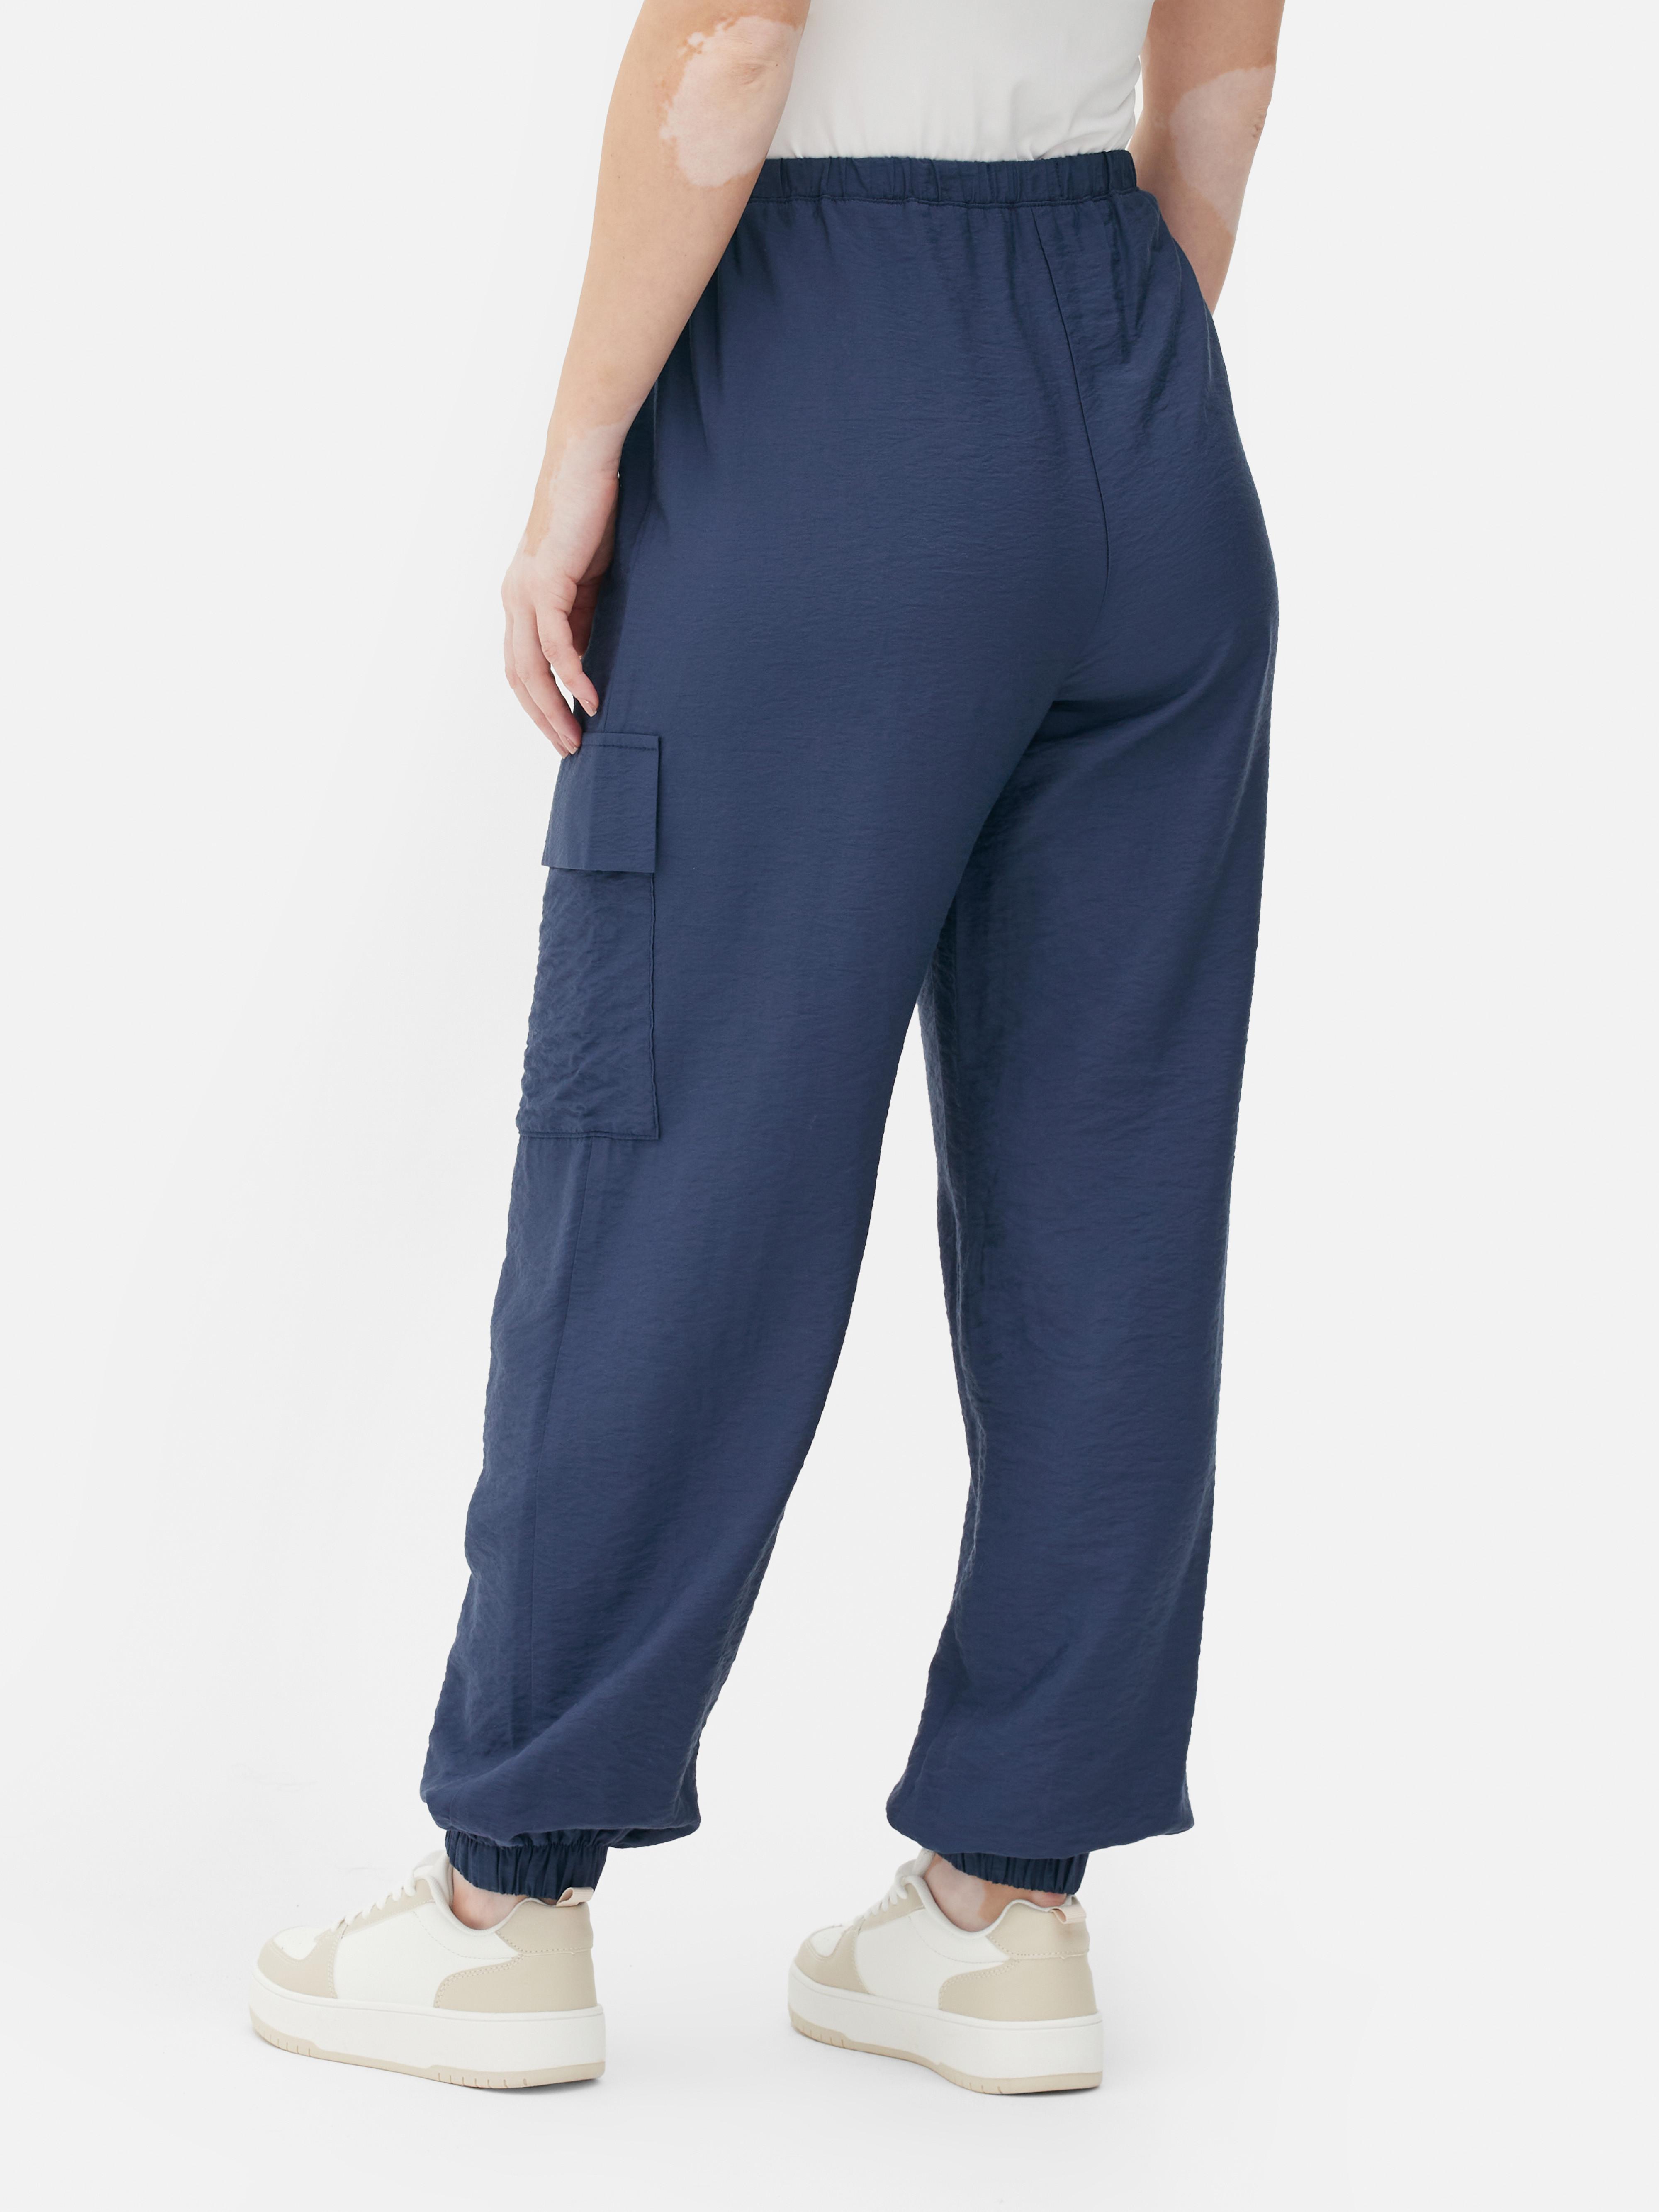 Women's Blue Relaxed Fit Cargo Pants | Primark